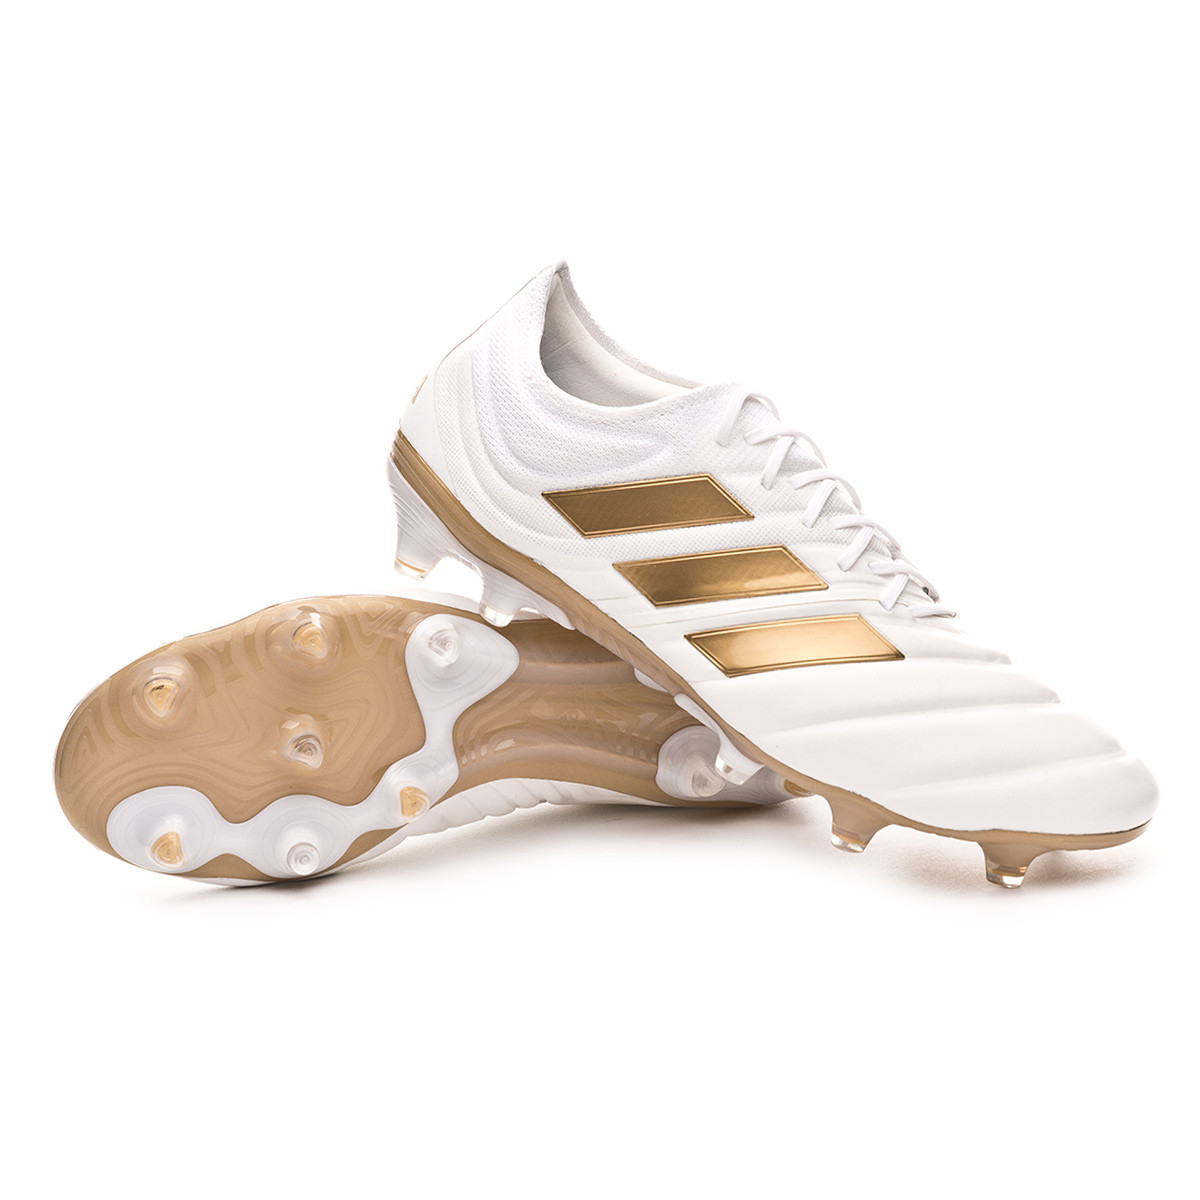 adidas football boots white and gold